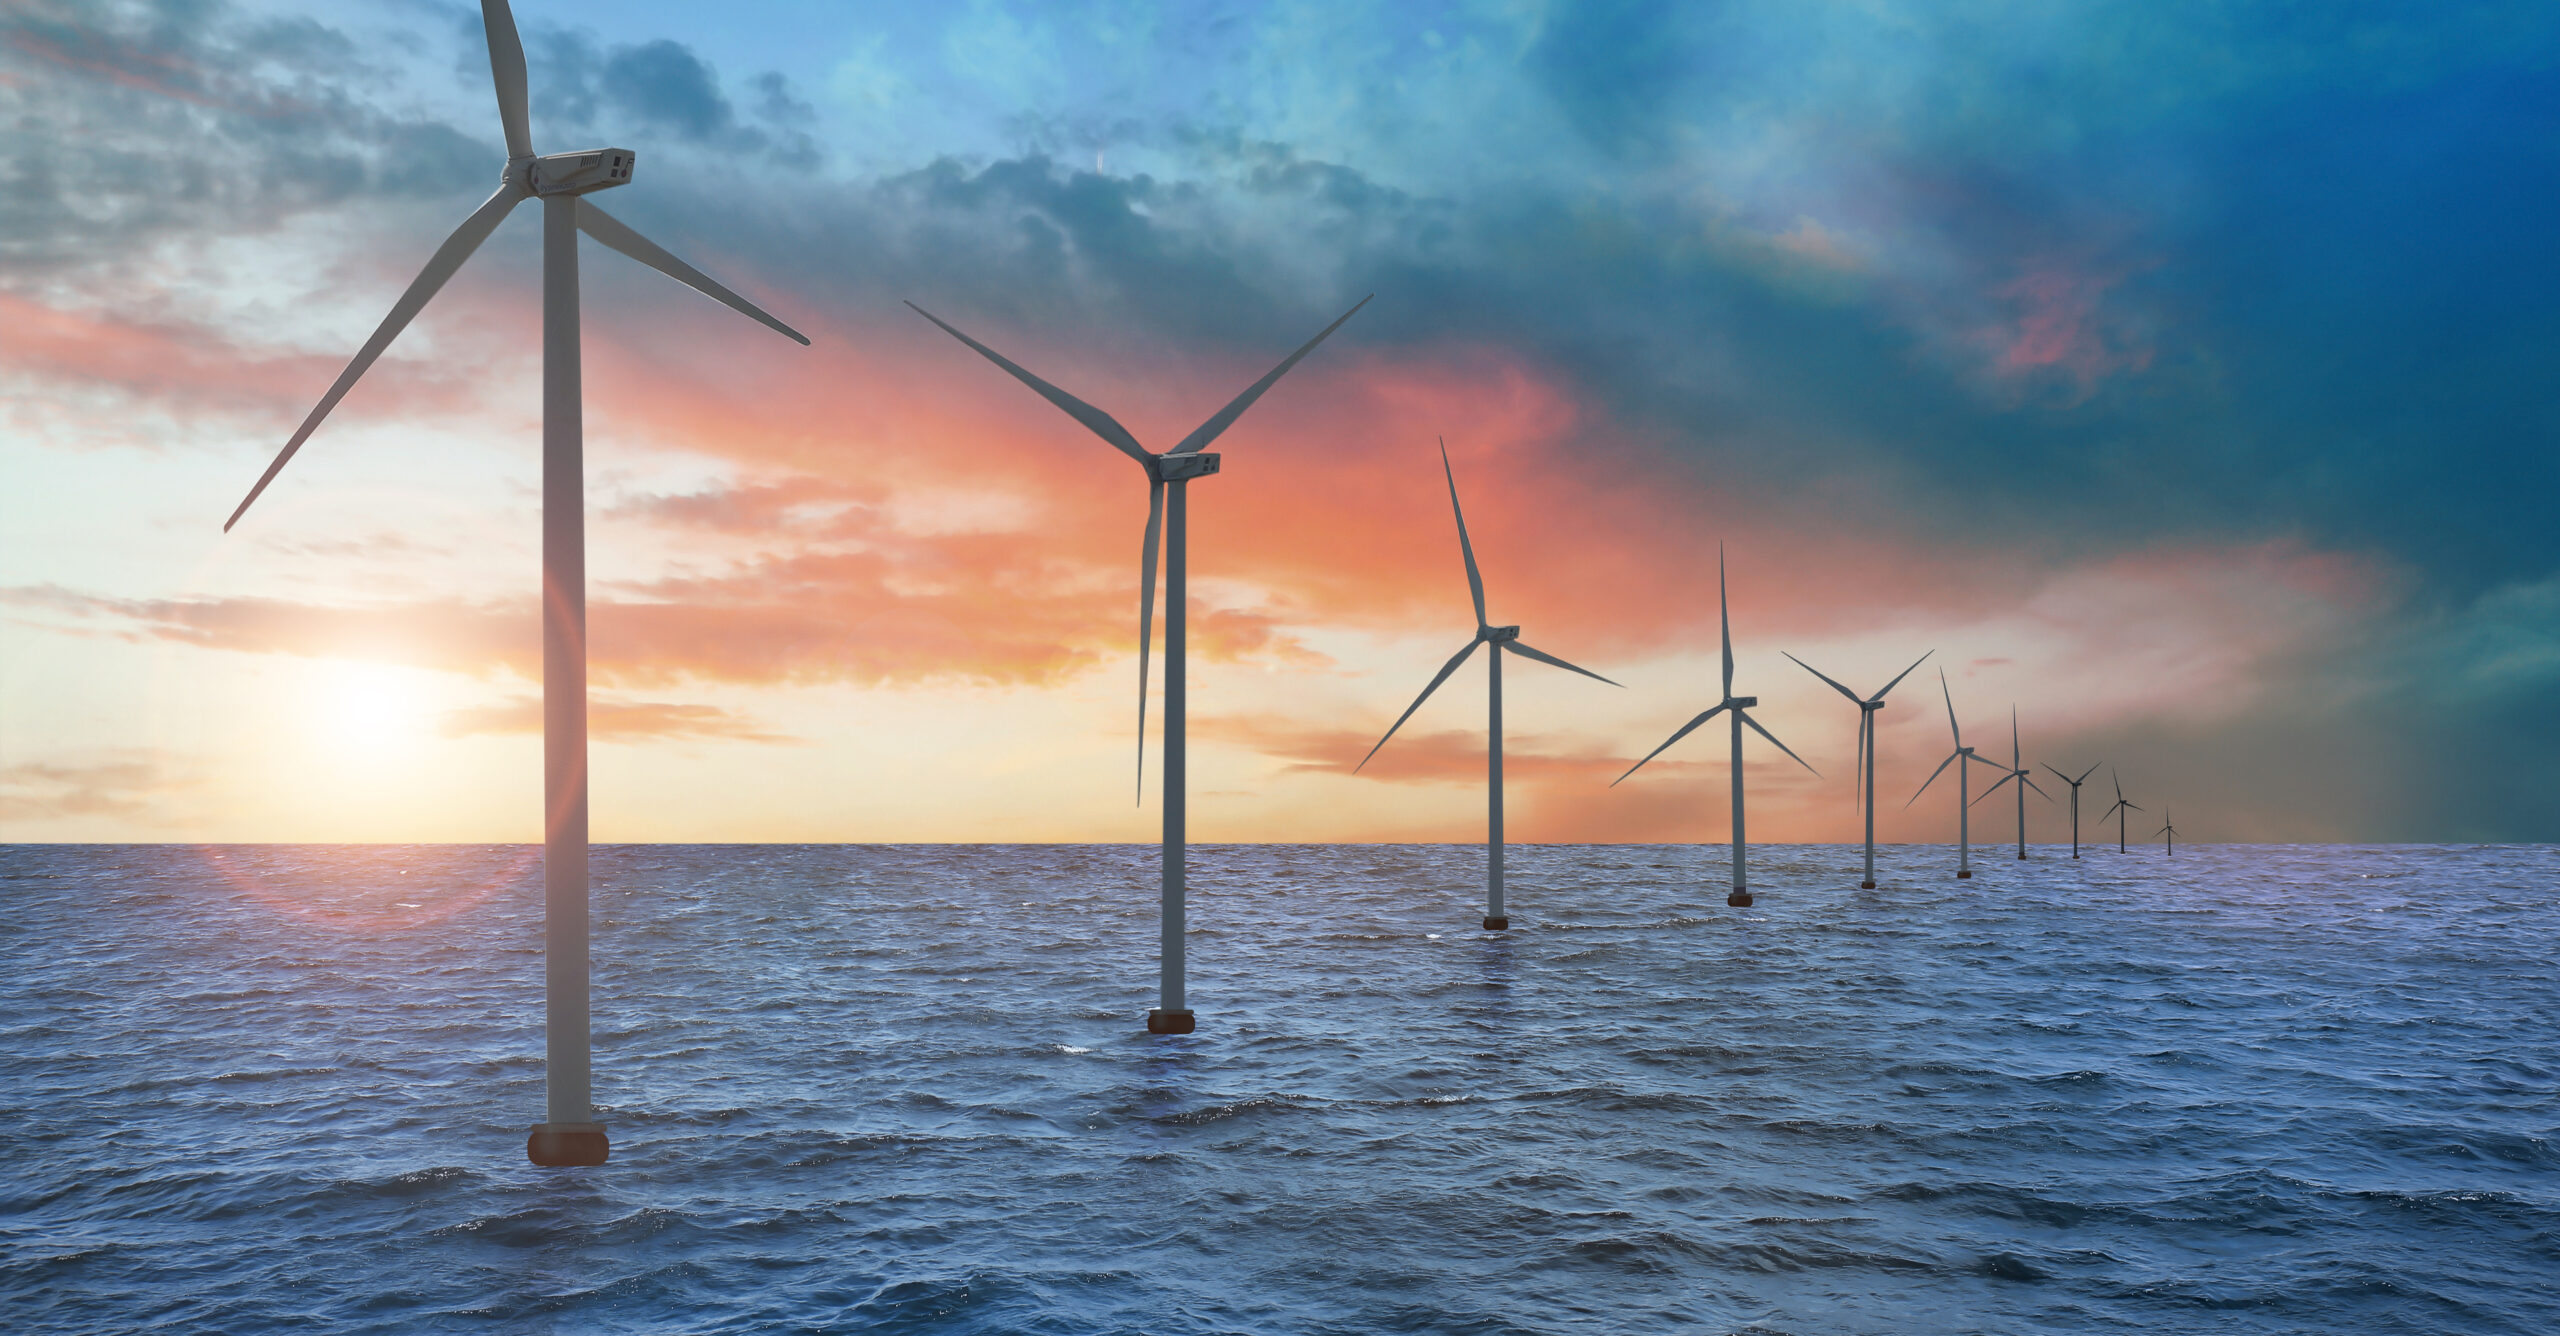 Expanding the North Sea offshore wind capacity